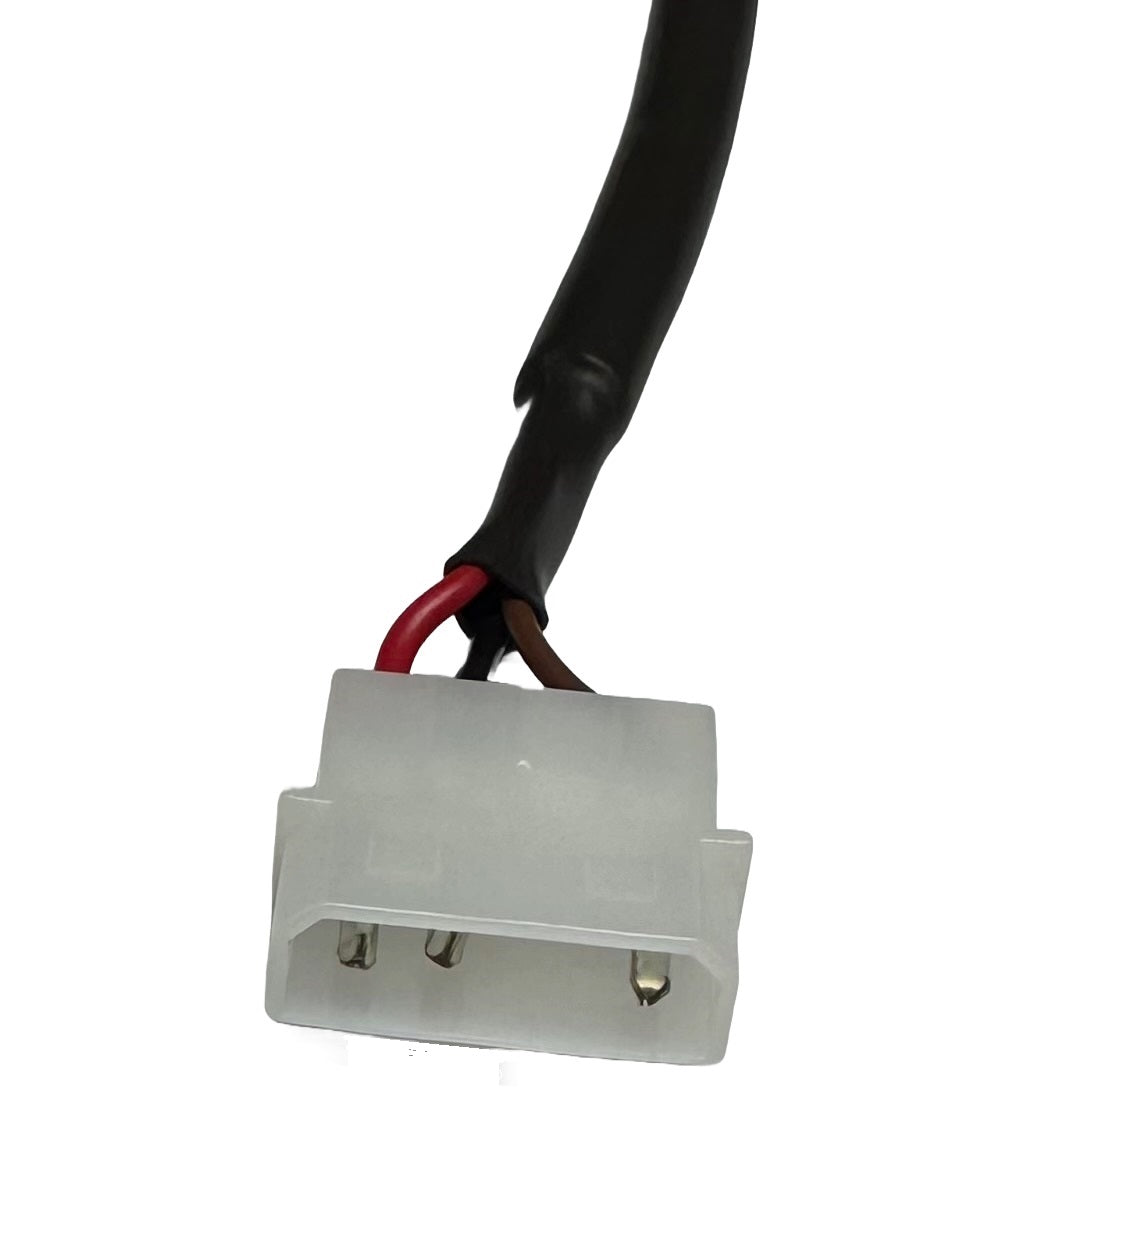 CD32 / A590 to Molex Adapter Power Cable